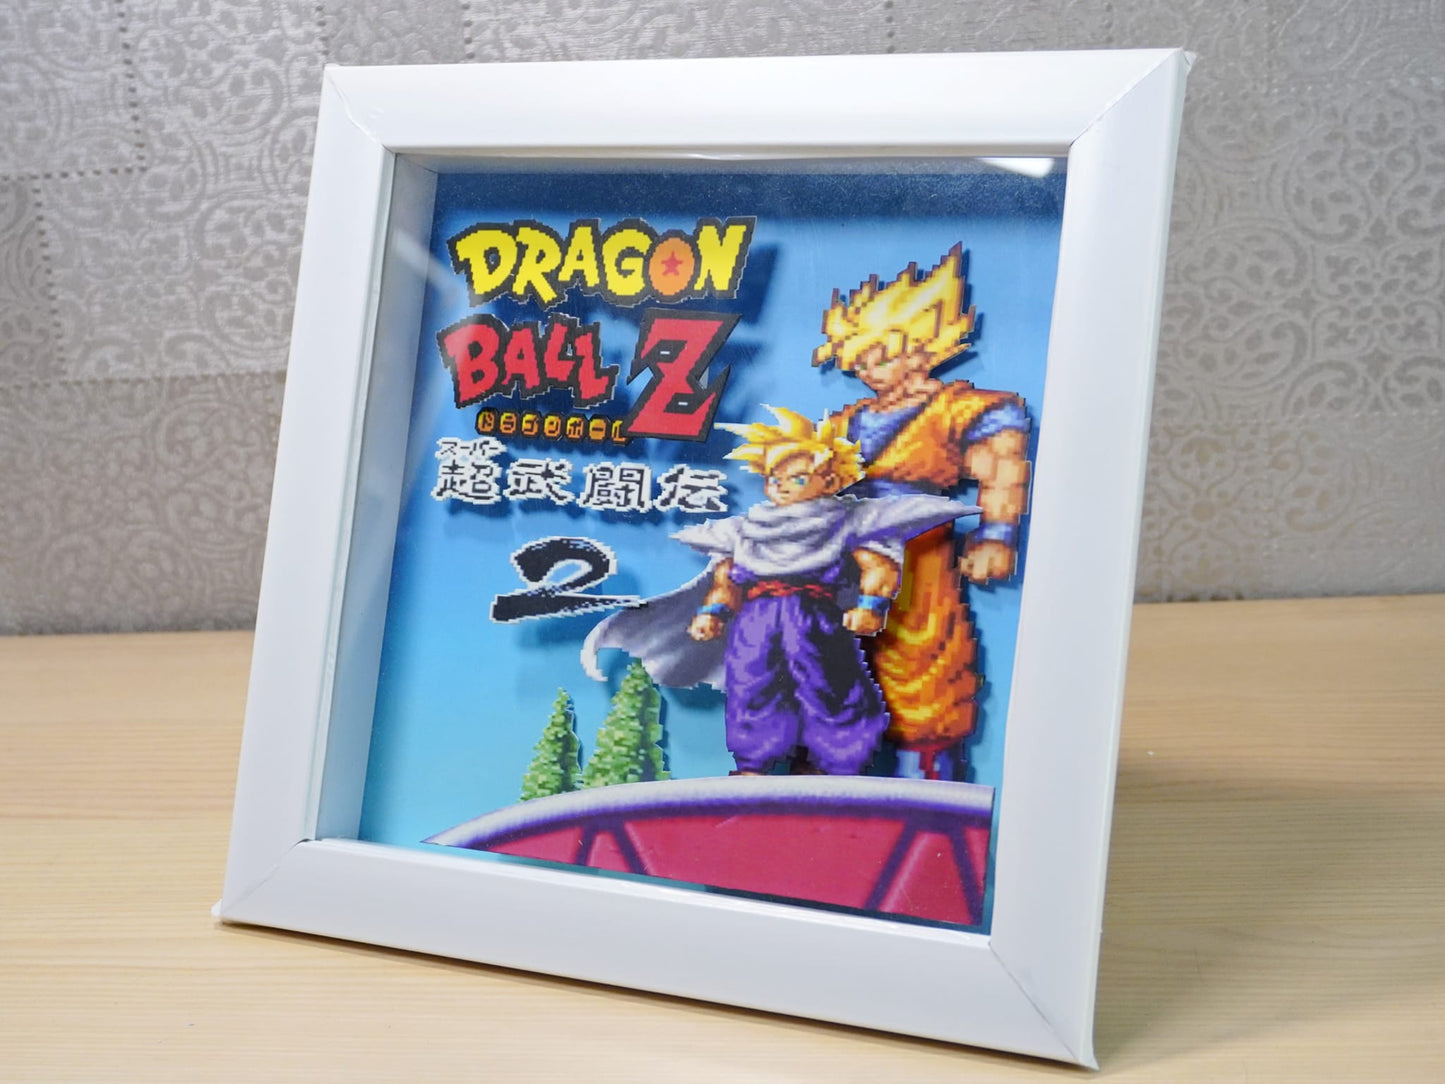 3D Retro Games Diorama Frame: Dragonball Z Butoden 2 title scene - 20x20cm with MUSIC